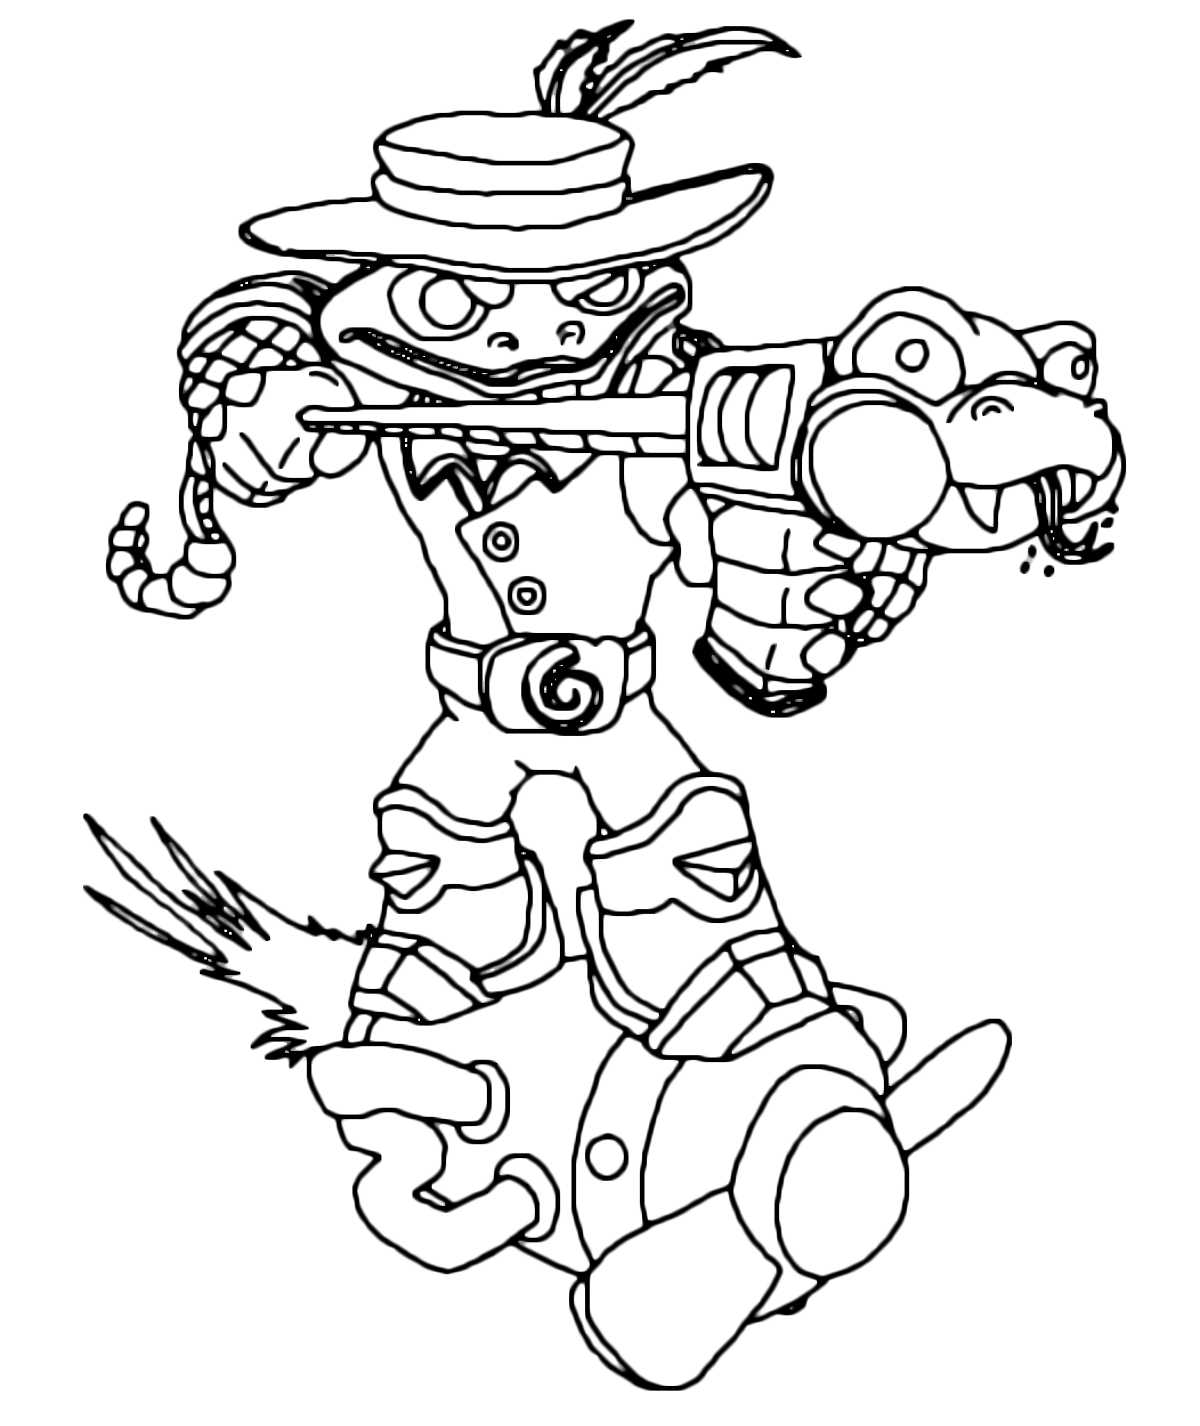 Skylanders - Swap Force - Rattle Jet with his rifle